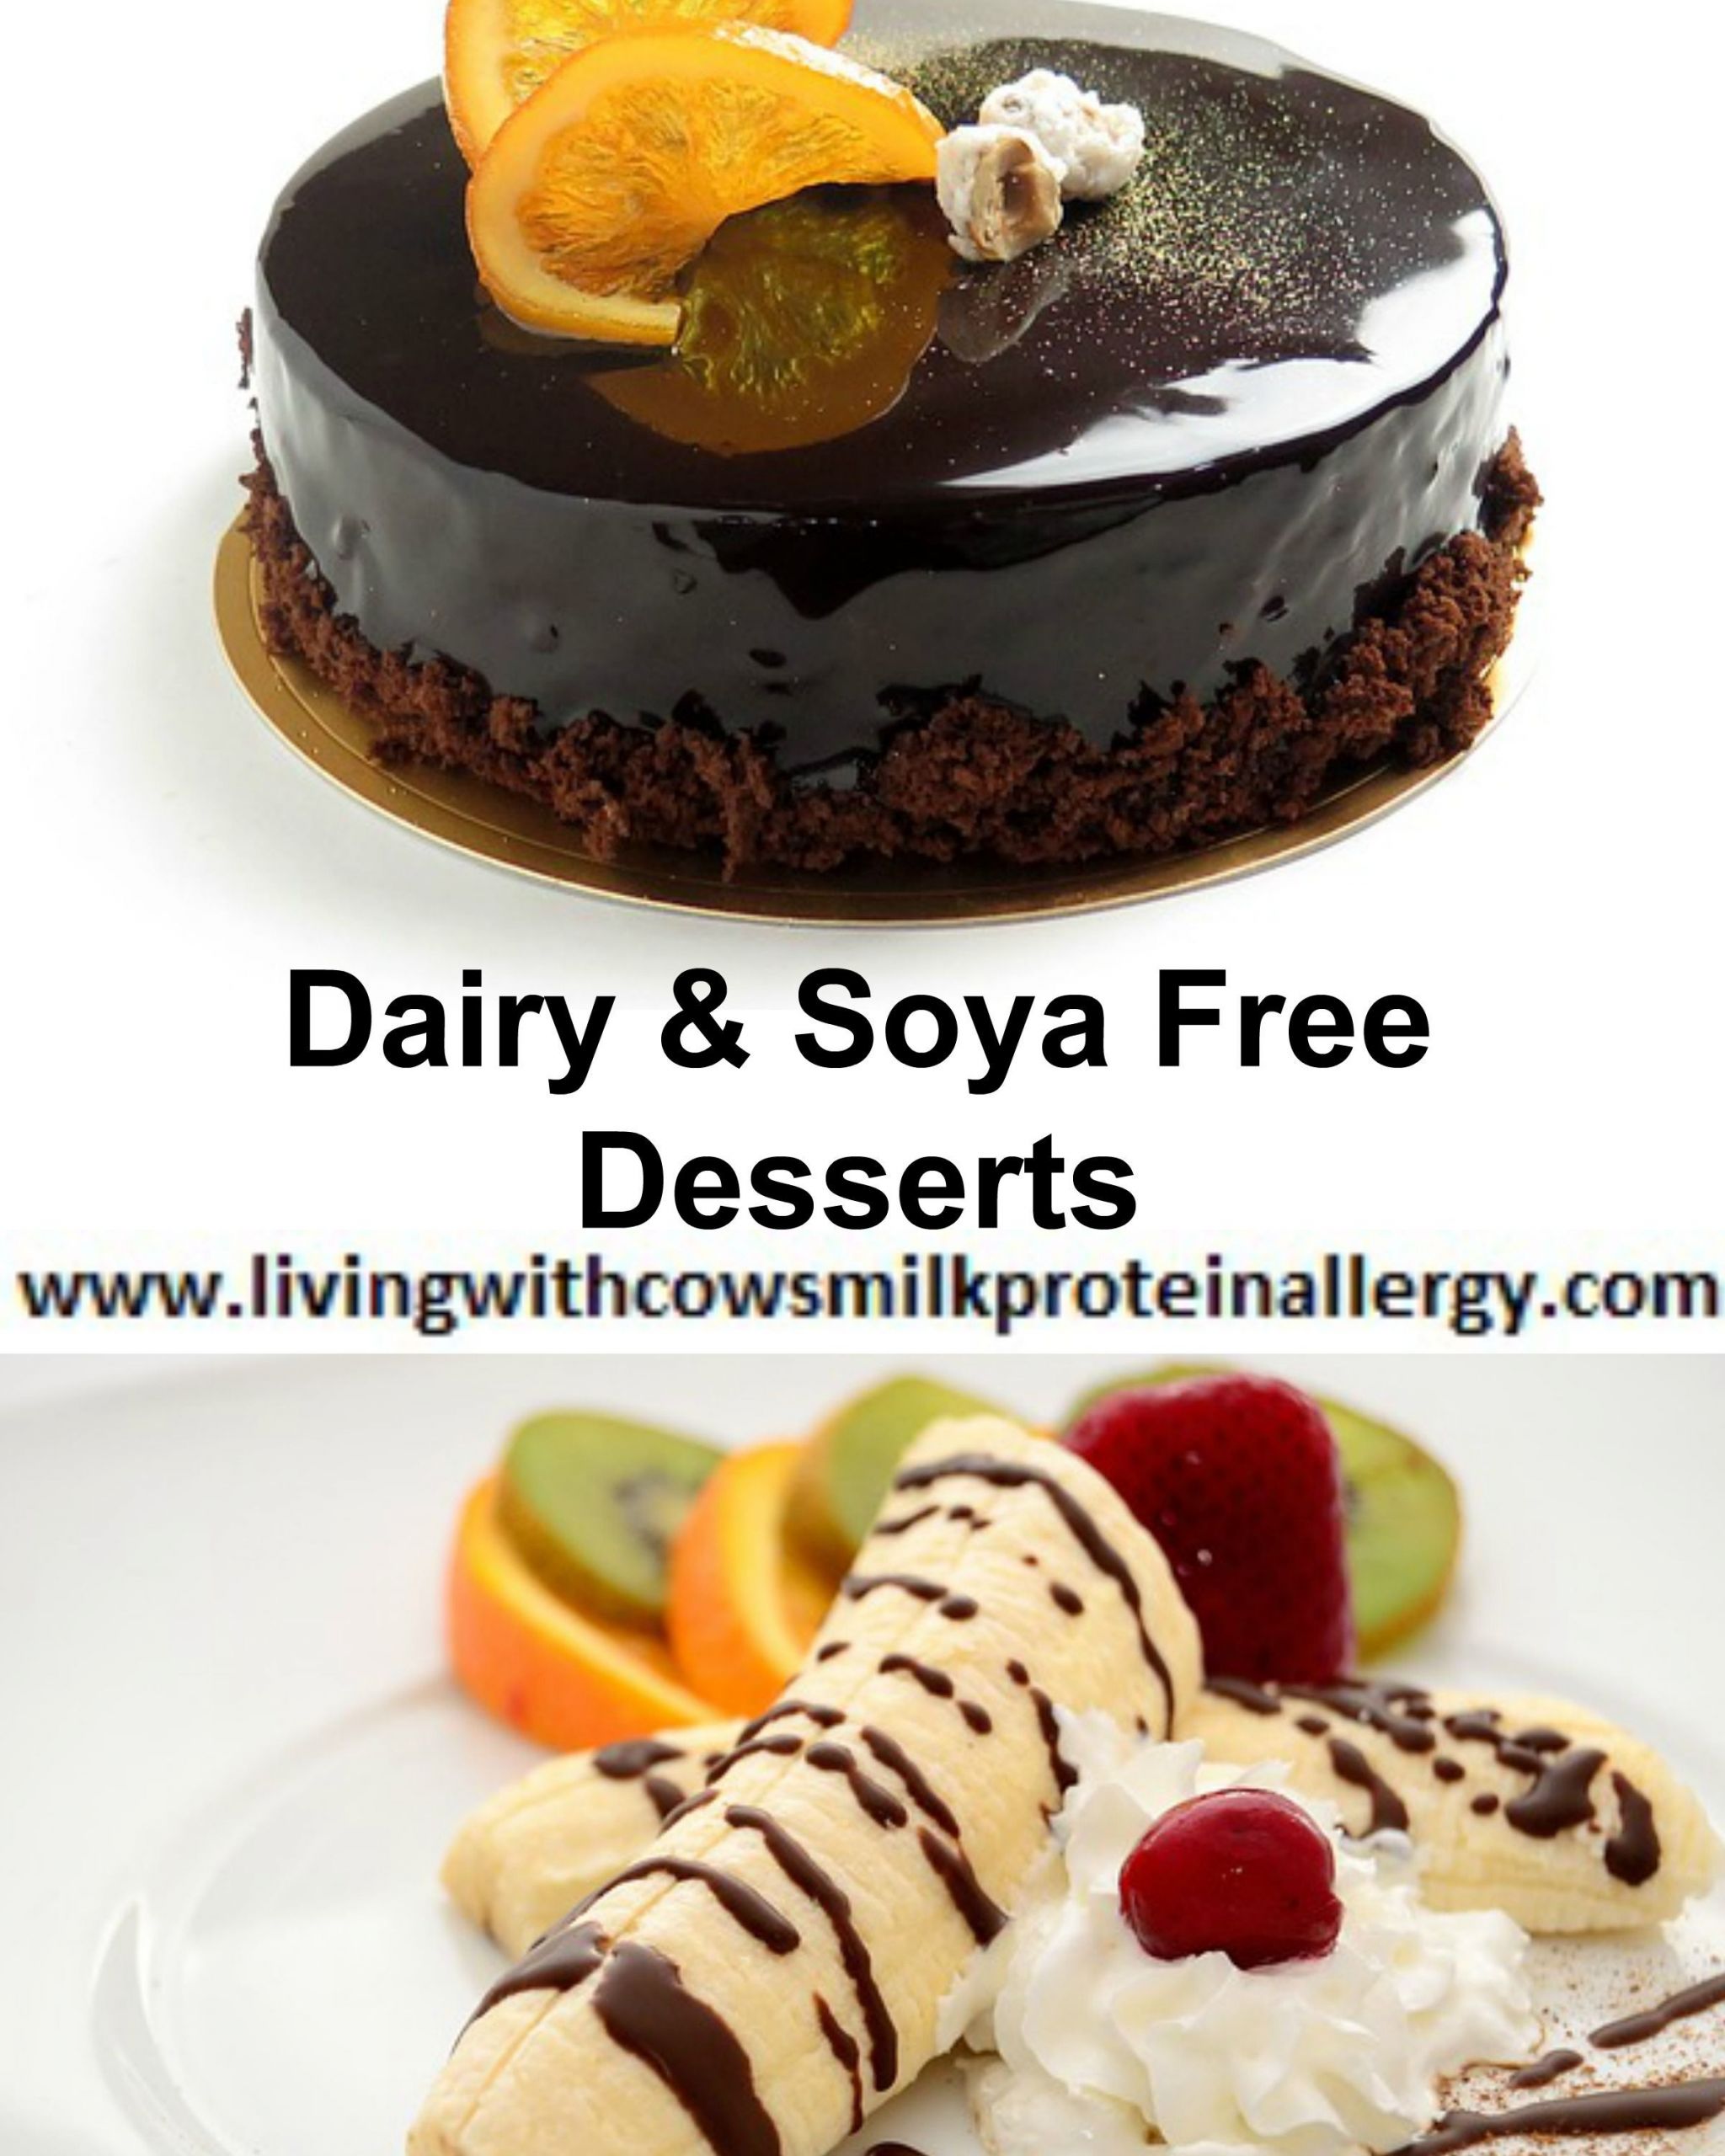 Dairy Free Desserts to Buy New Dairy &amp; soya Free Desserts &amp; Puddings Available to Buy